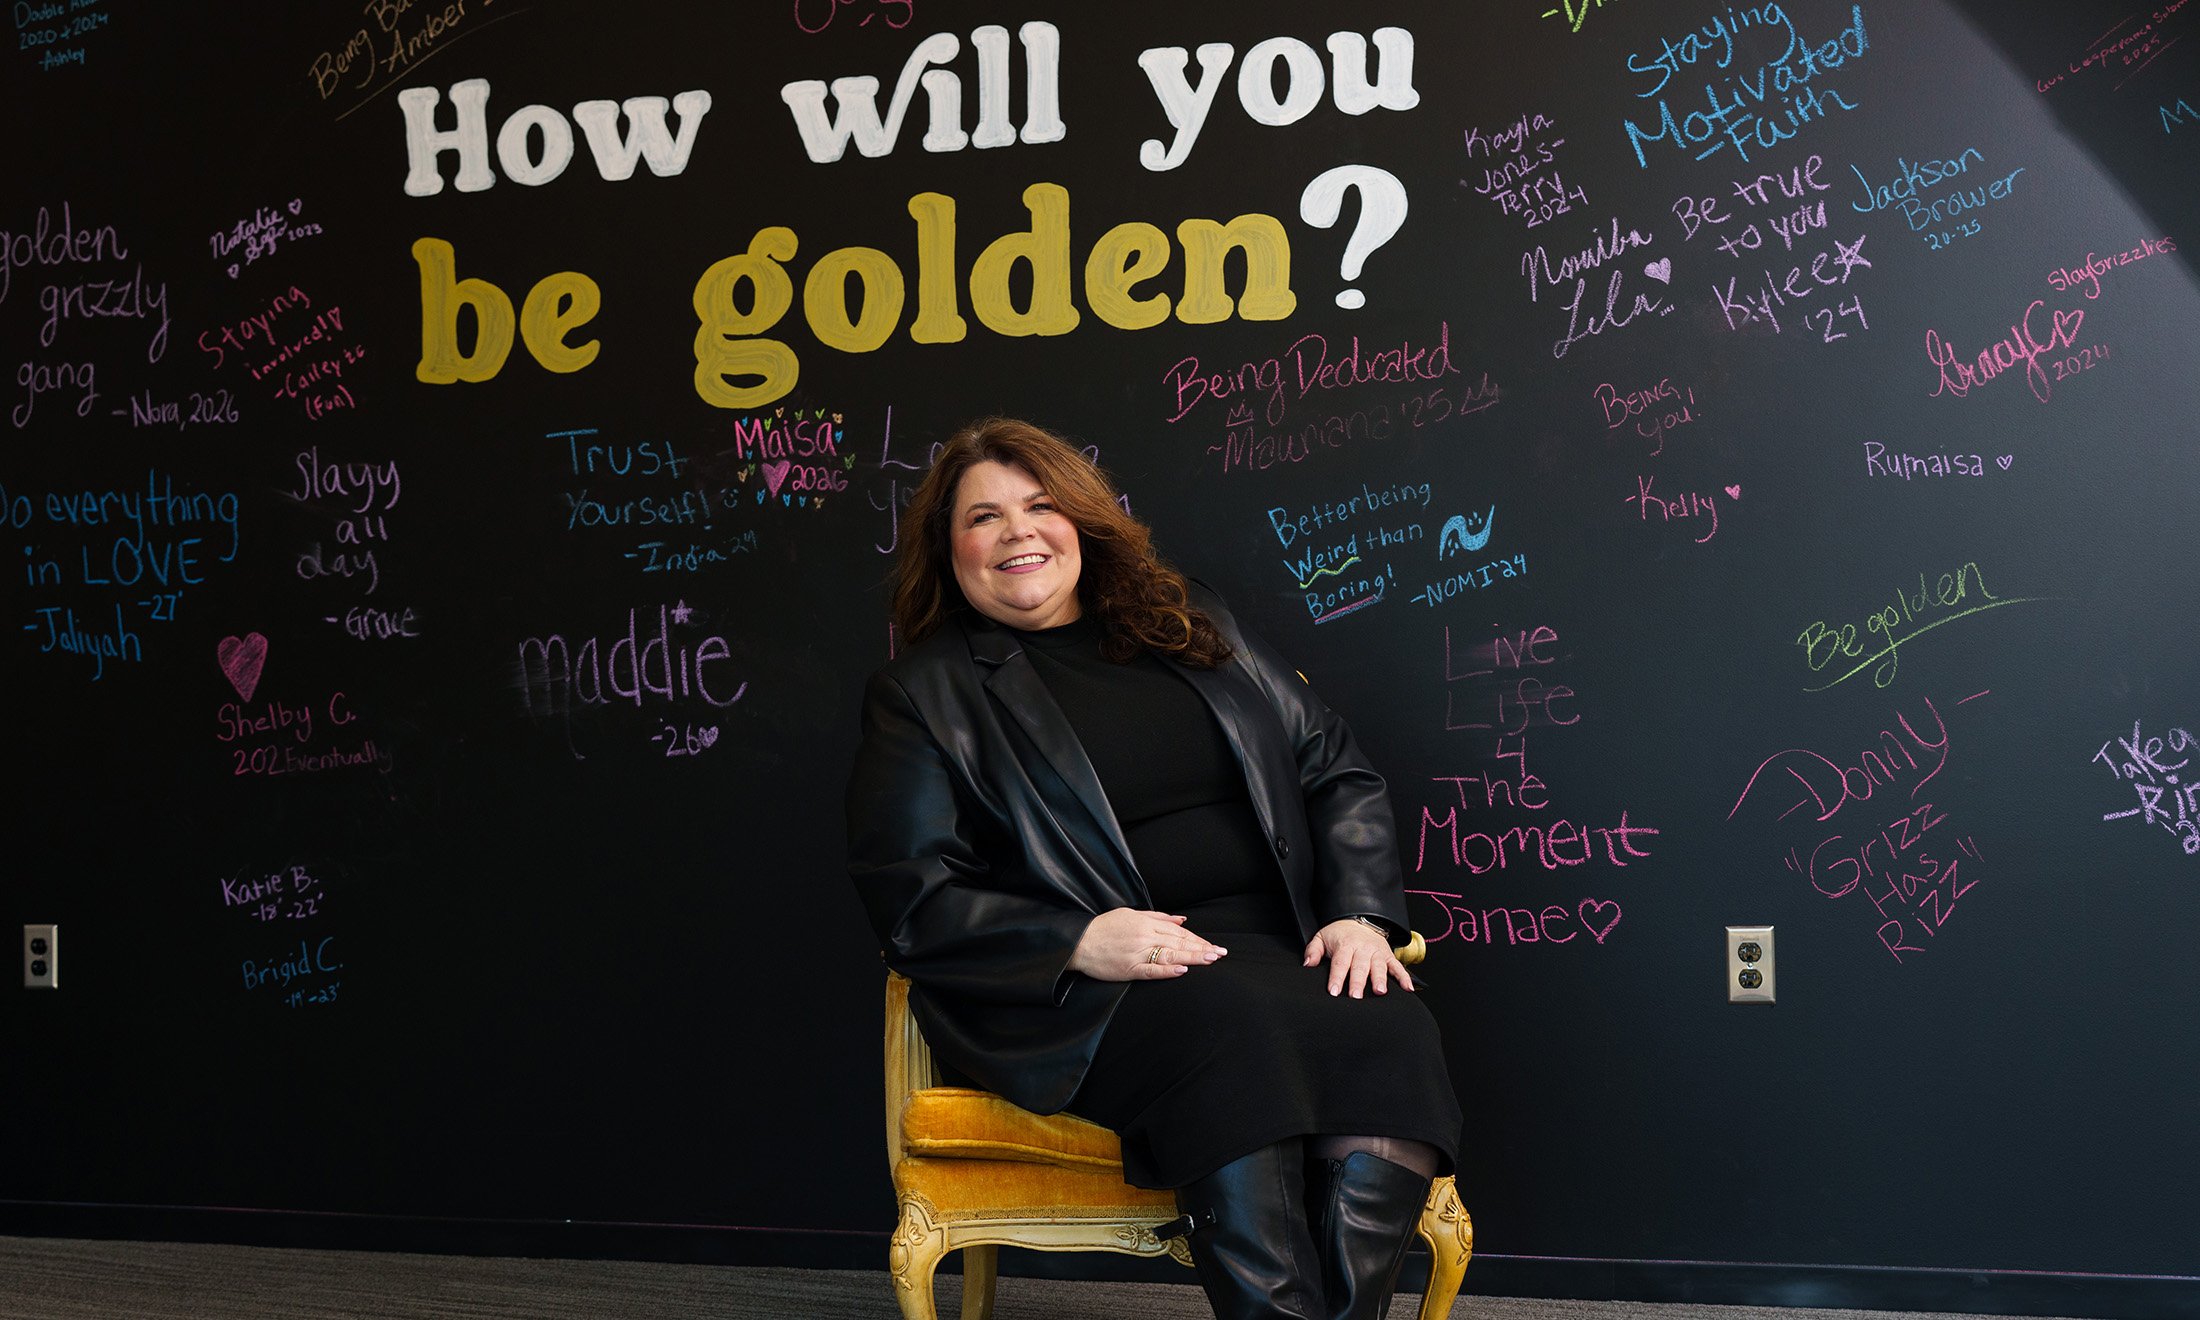 A woman in the gold seat in front of a chalkboard that says "How will you be golden?"